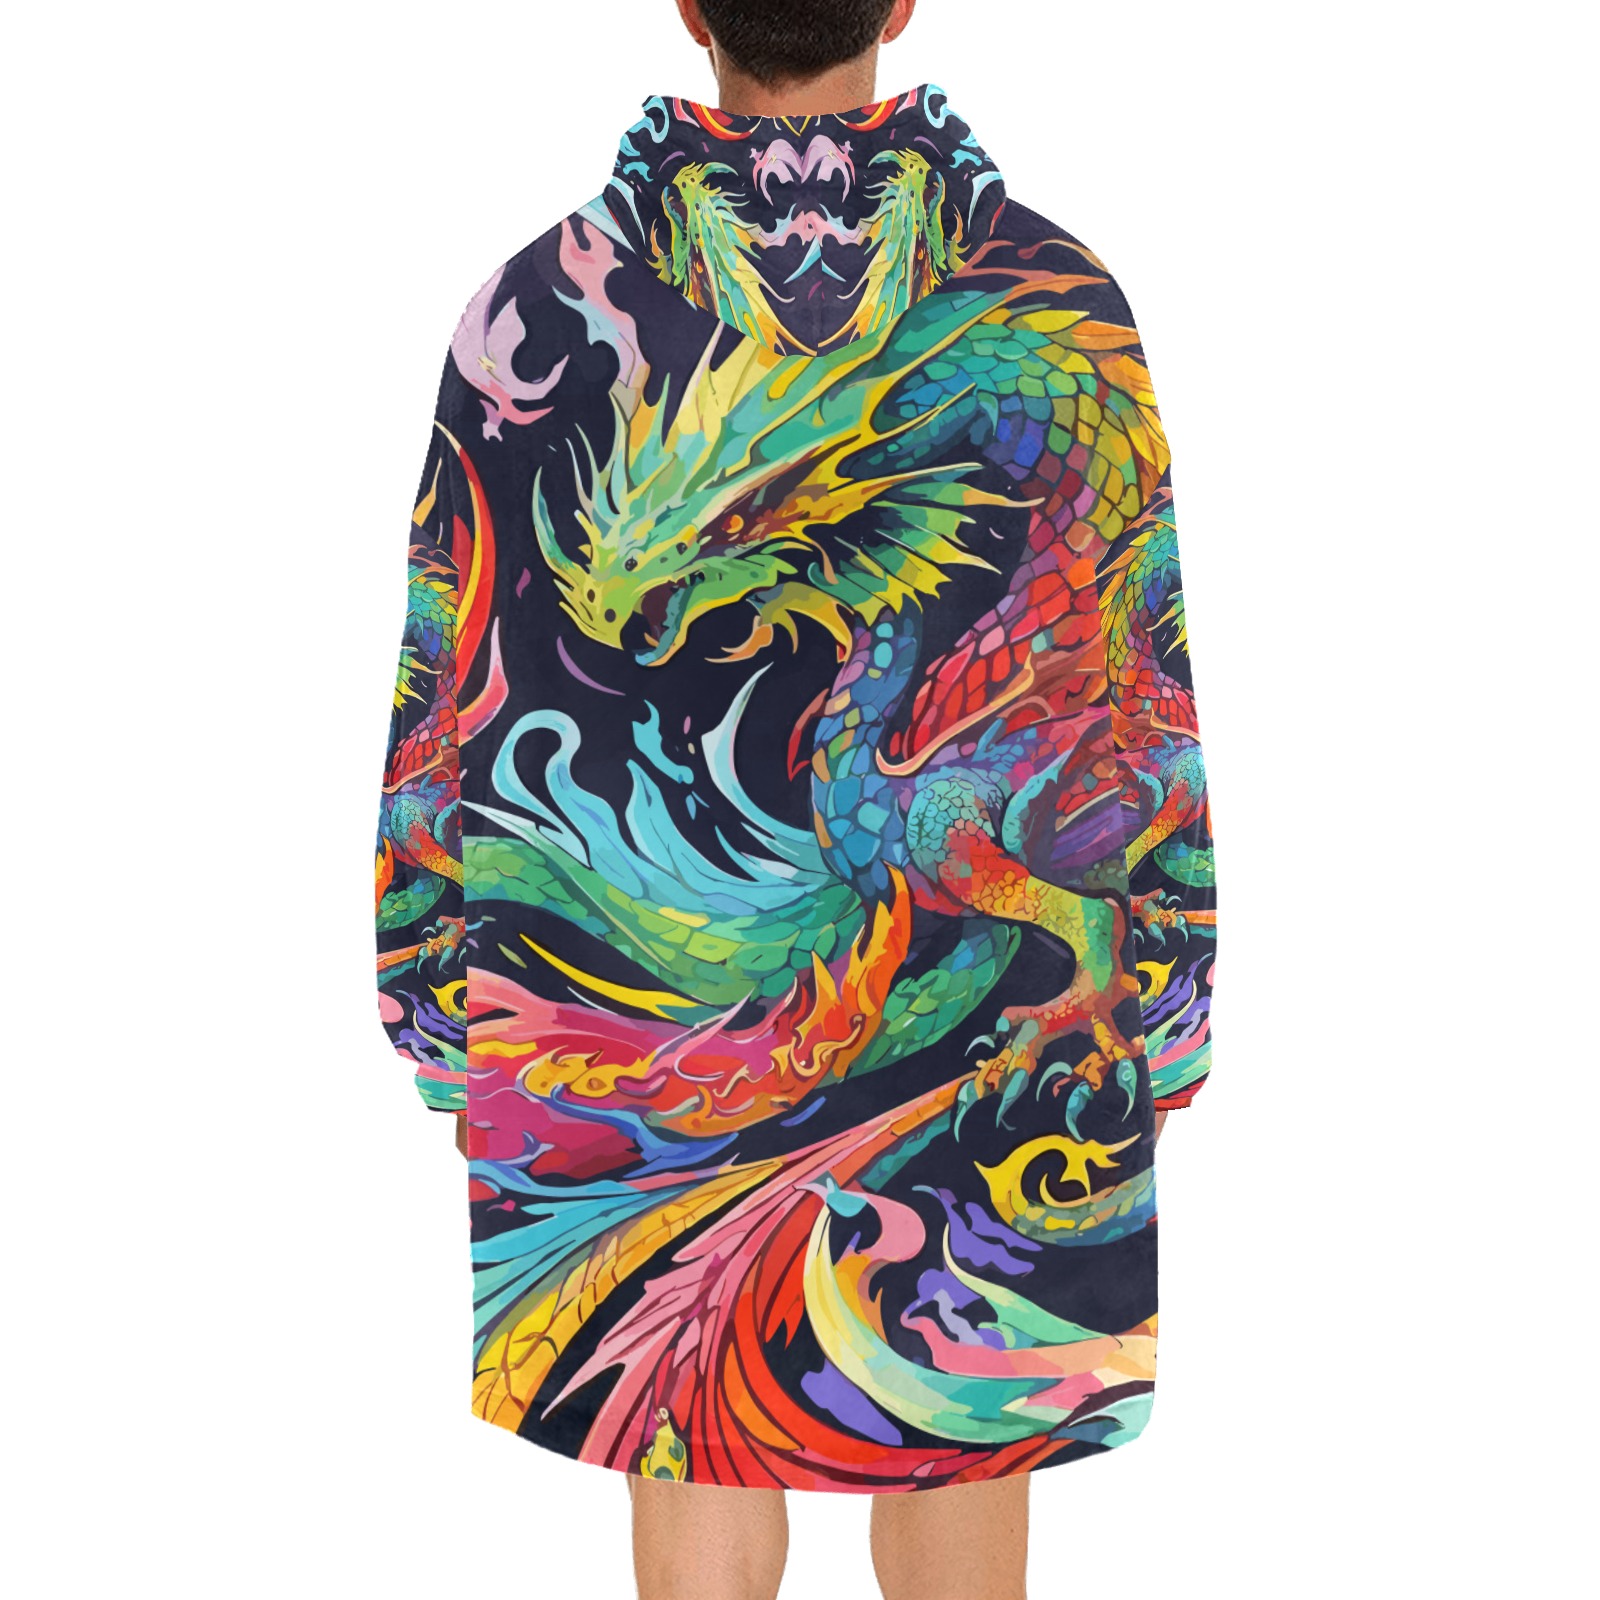 Awesome colorful abstract dragons, fire on black. Blanket Hoodie for Men